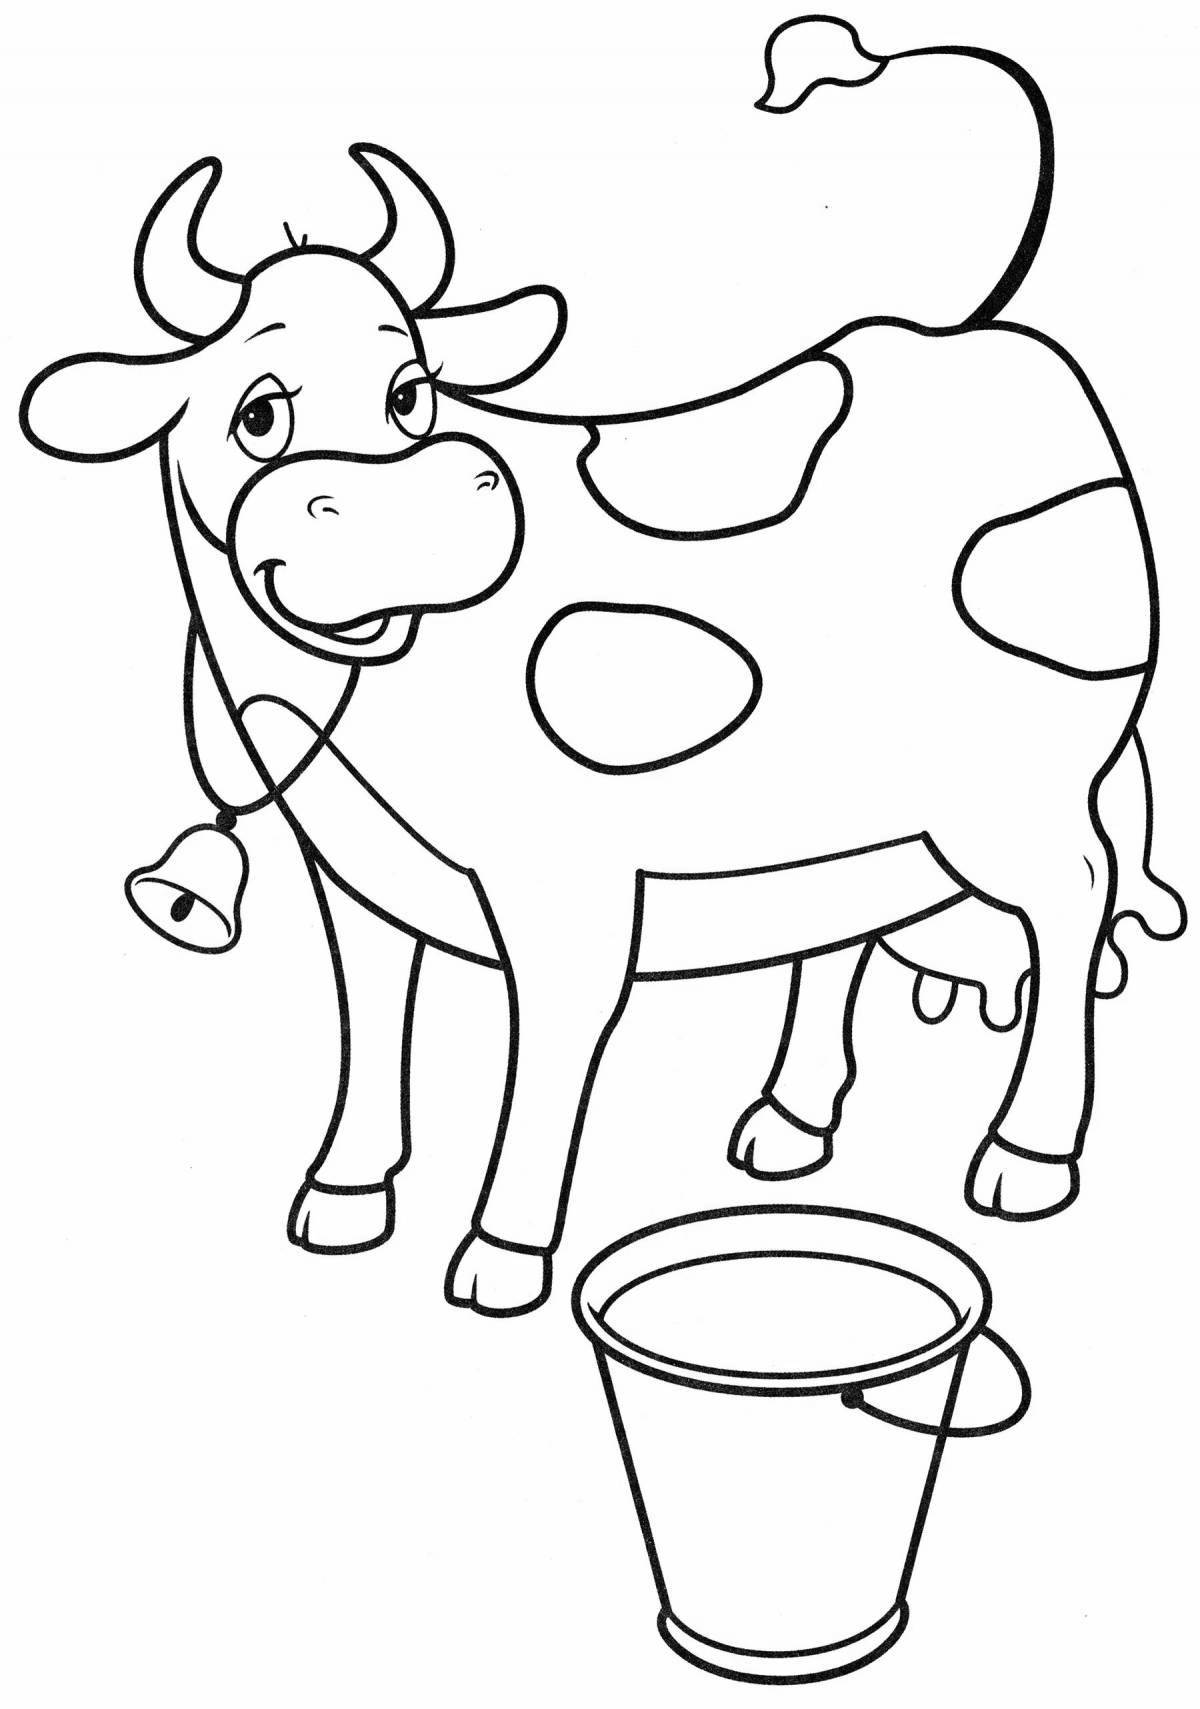 Coloring book cheerful calf for children